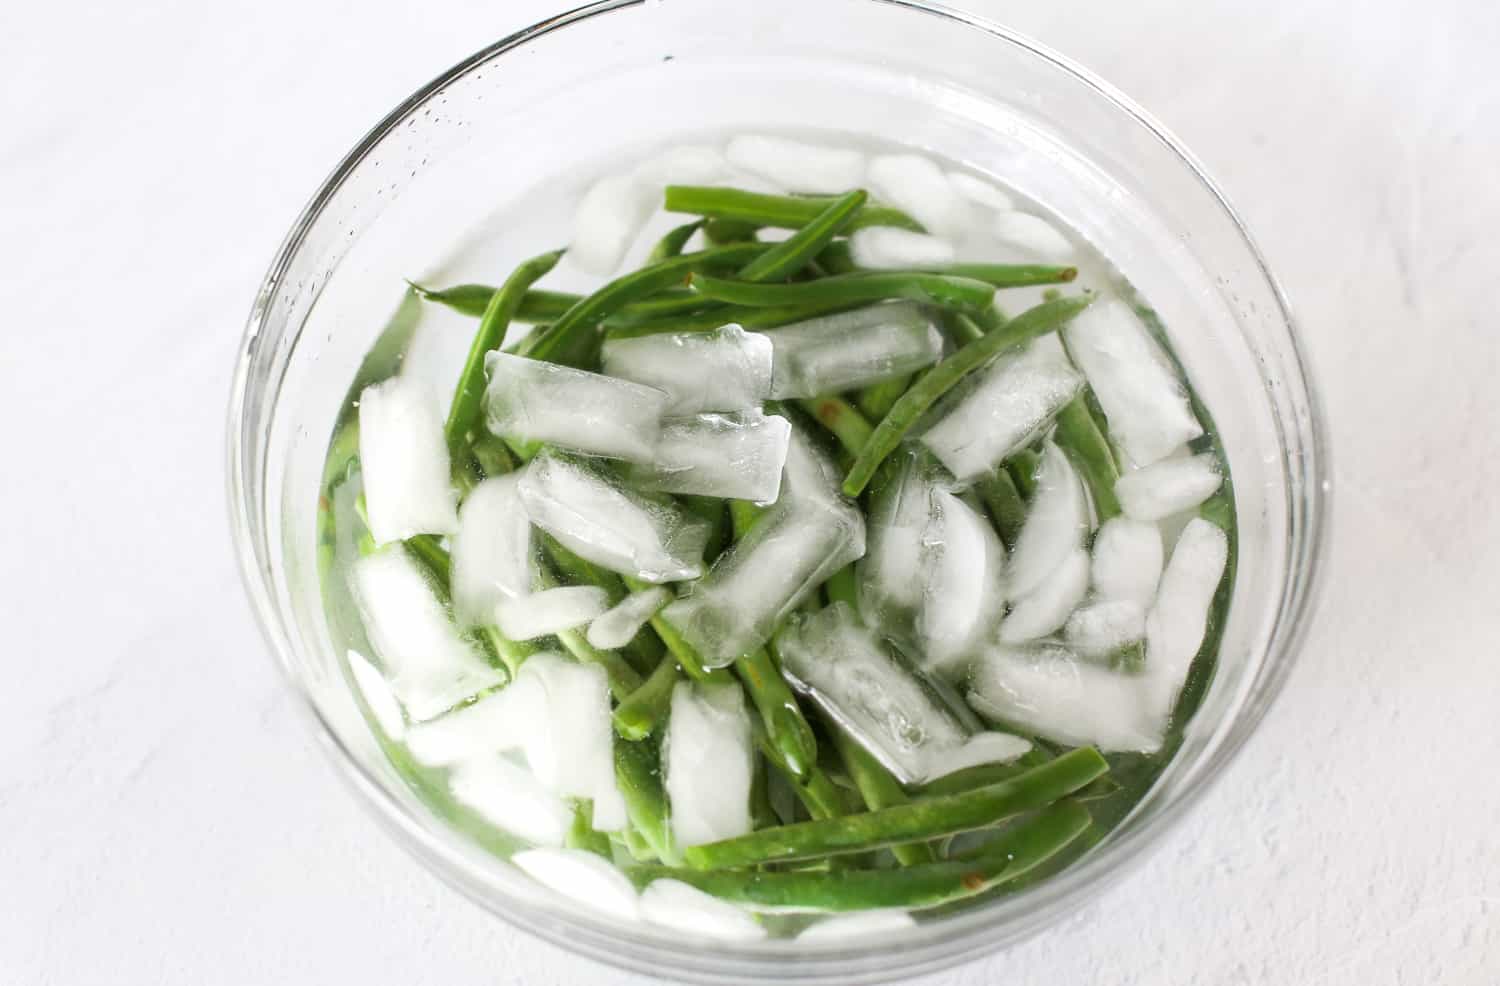 Fresh green beans in a bowl of ice water after being parboiled.